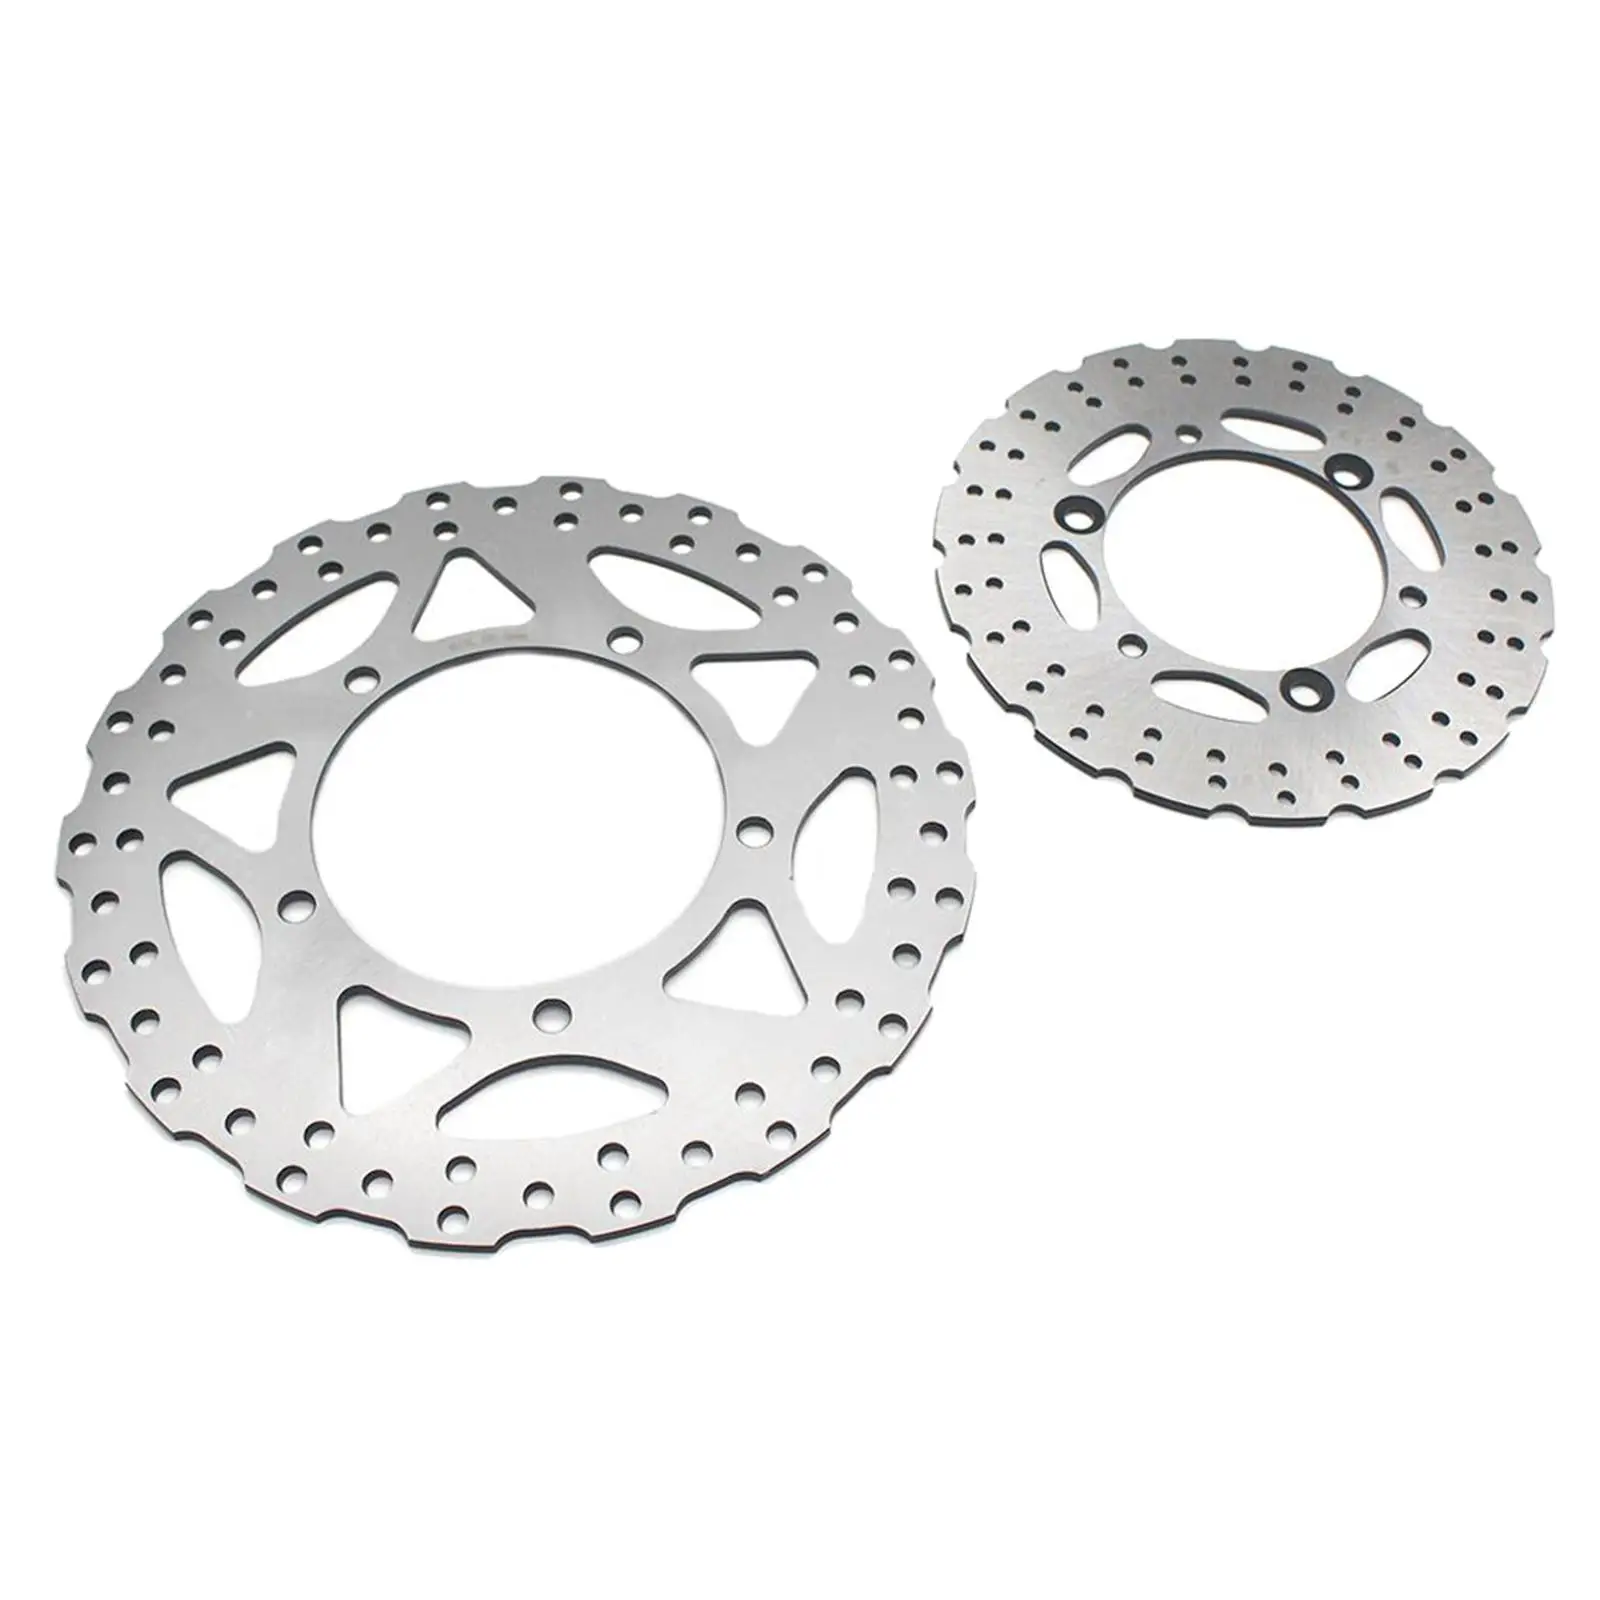 Motorcycle Wheel Round Brake Disc Rotor Durable 00  2013 - 2018   Accessories